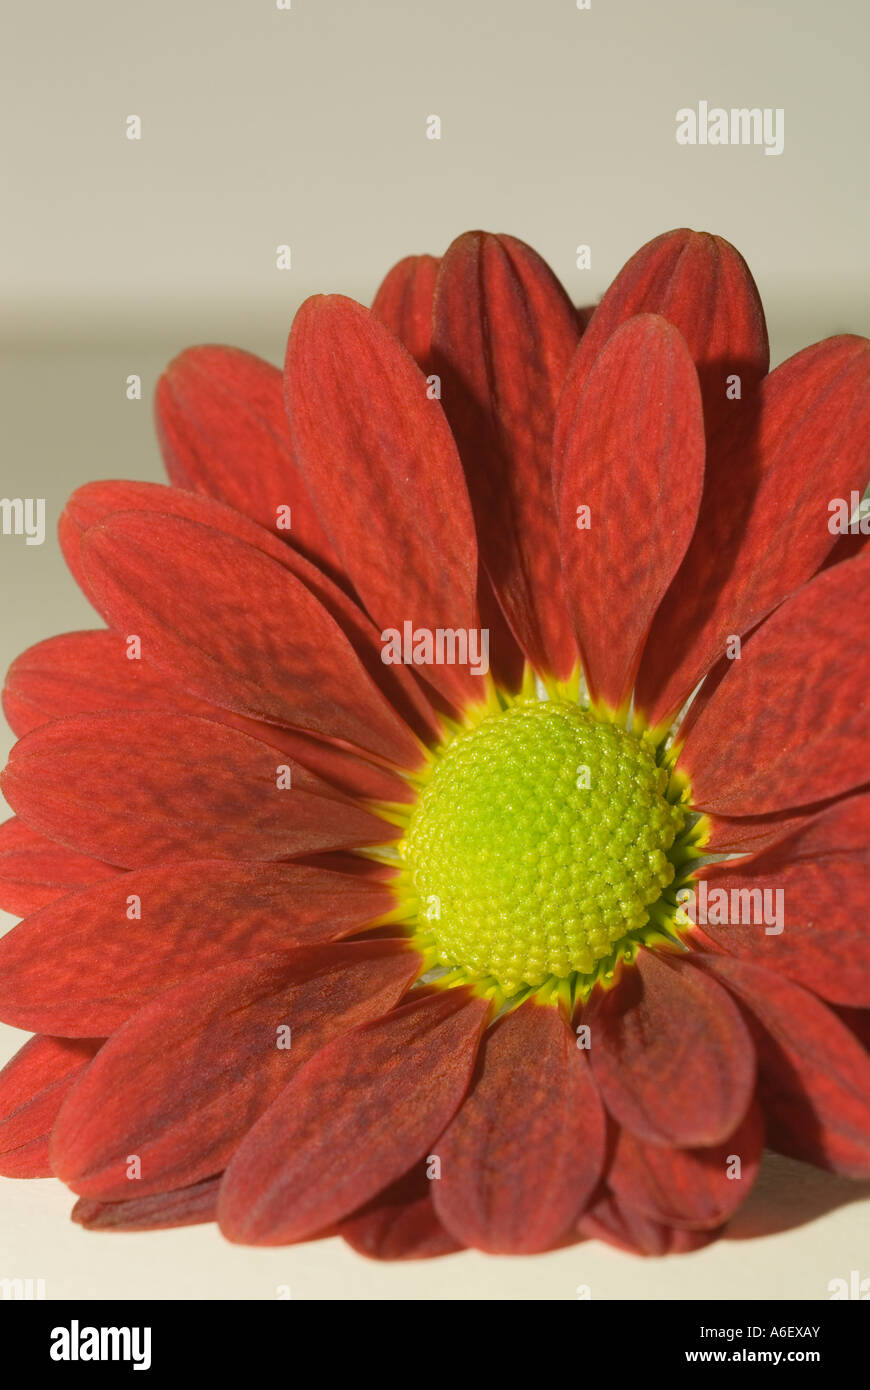 Red Gerbera flower with yellow centre Stock Photo